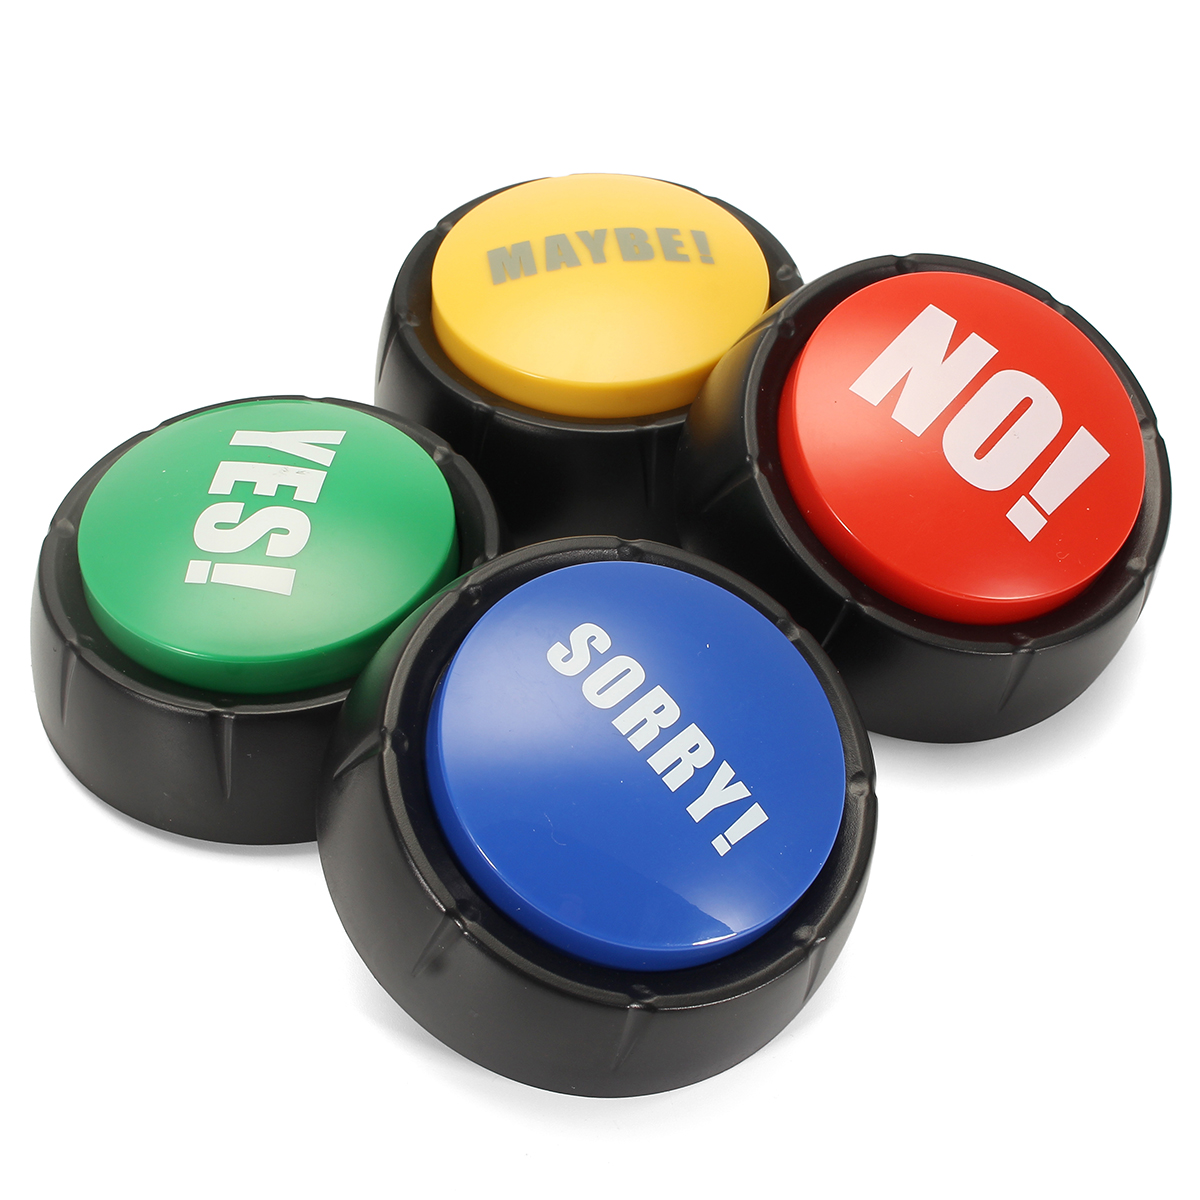 4pcs-NO-YES-MAYBE-SORRY-Sound-Button-Event-Game-Party-Tools-Holiday-Supplies-1200945